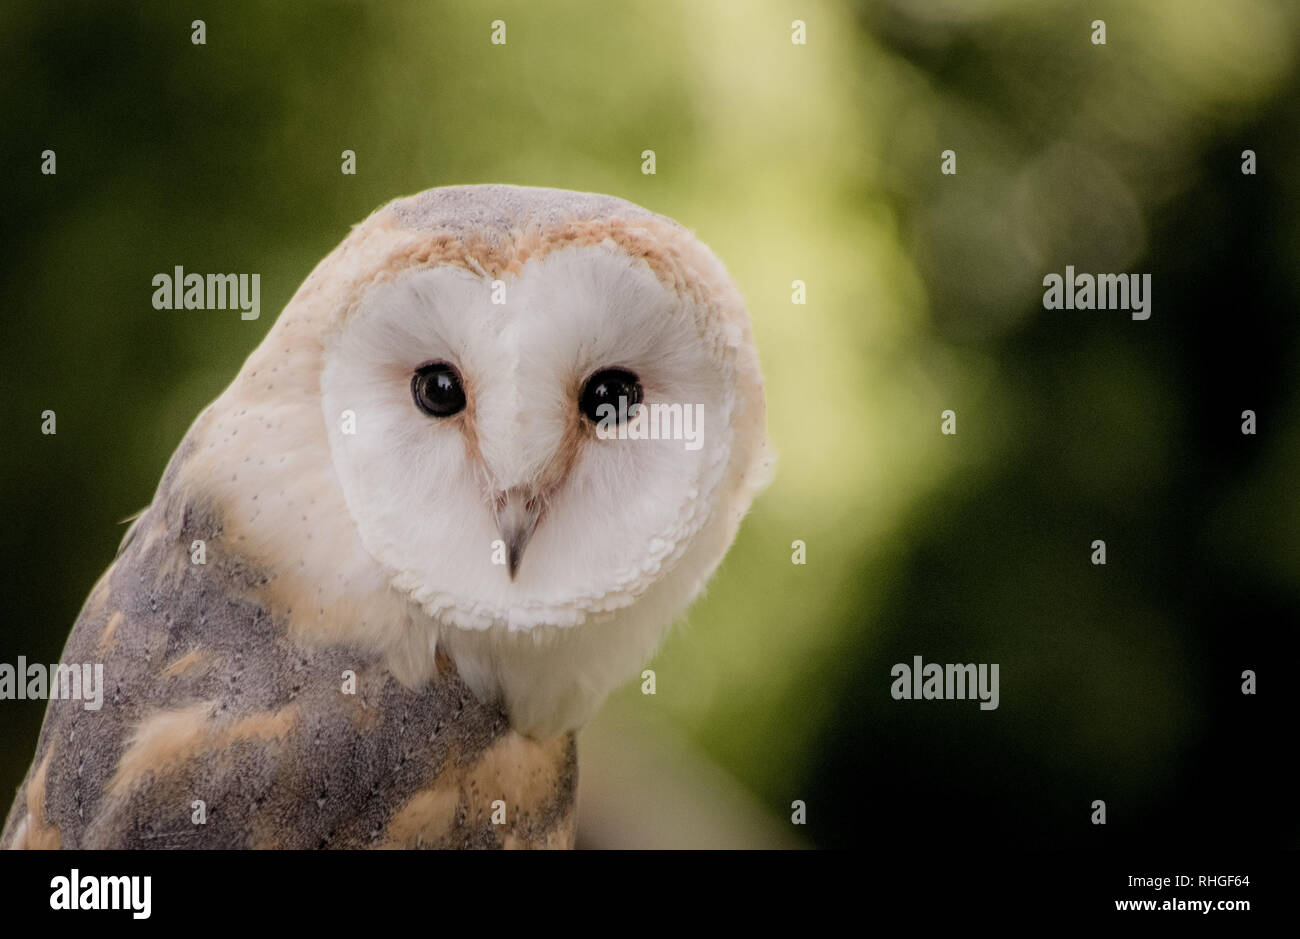 White owl looking out, facing the camera - Imagen Stock Photo